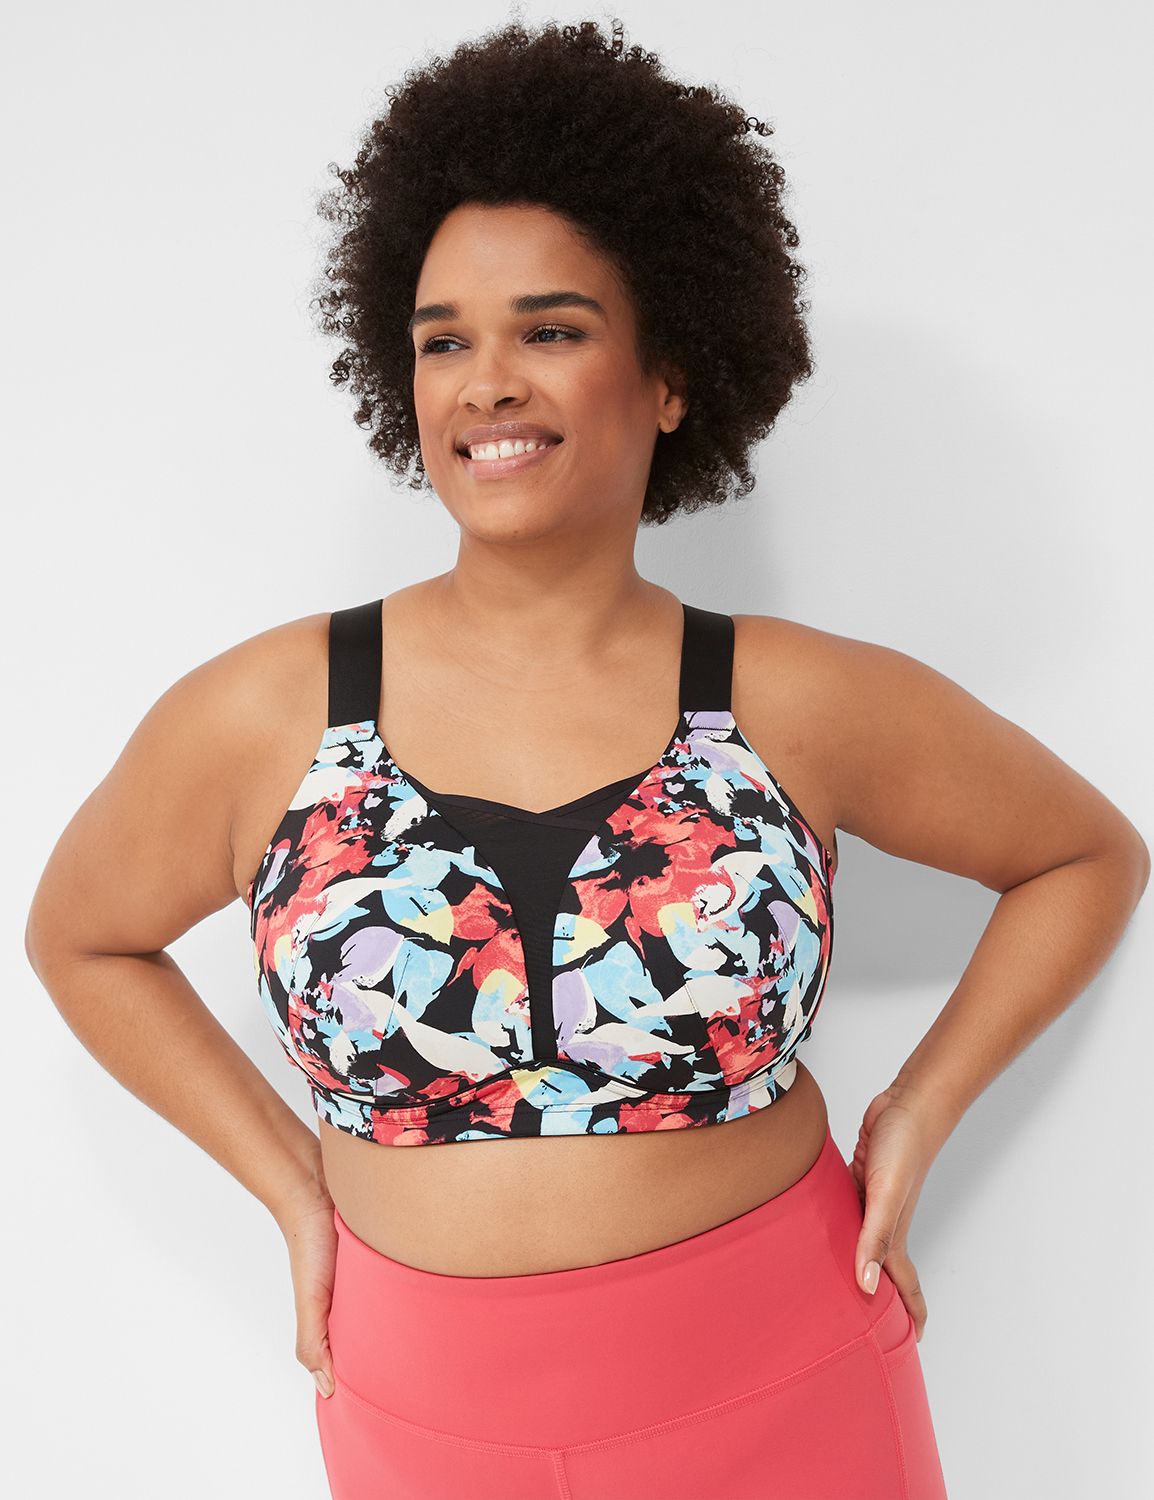 Lane Bryant - Running errands or running on the treadmill? LIVI sport bras  gotchu, no matter what you're up to today. Shop LIVI:  #LIVILIFE